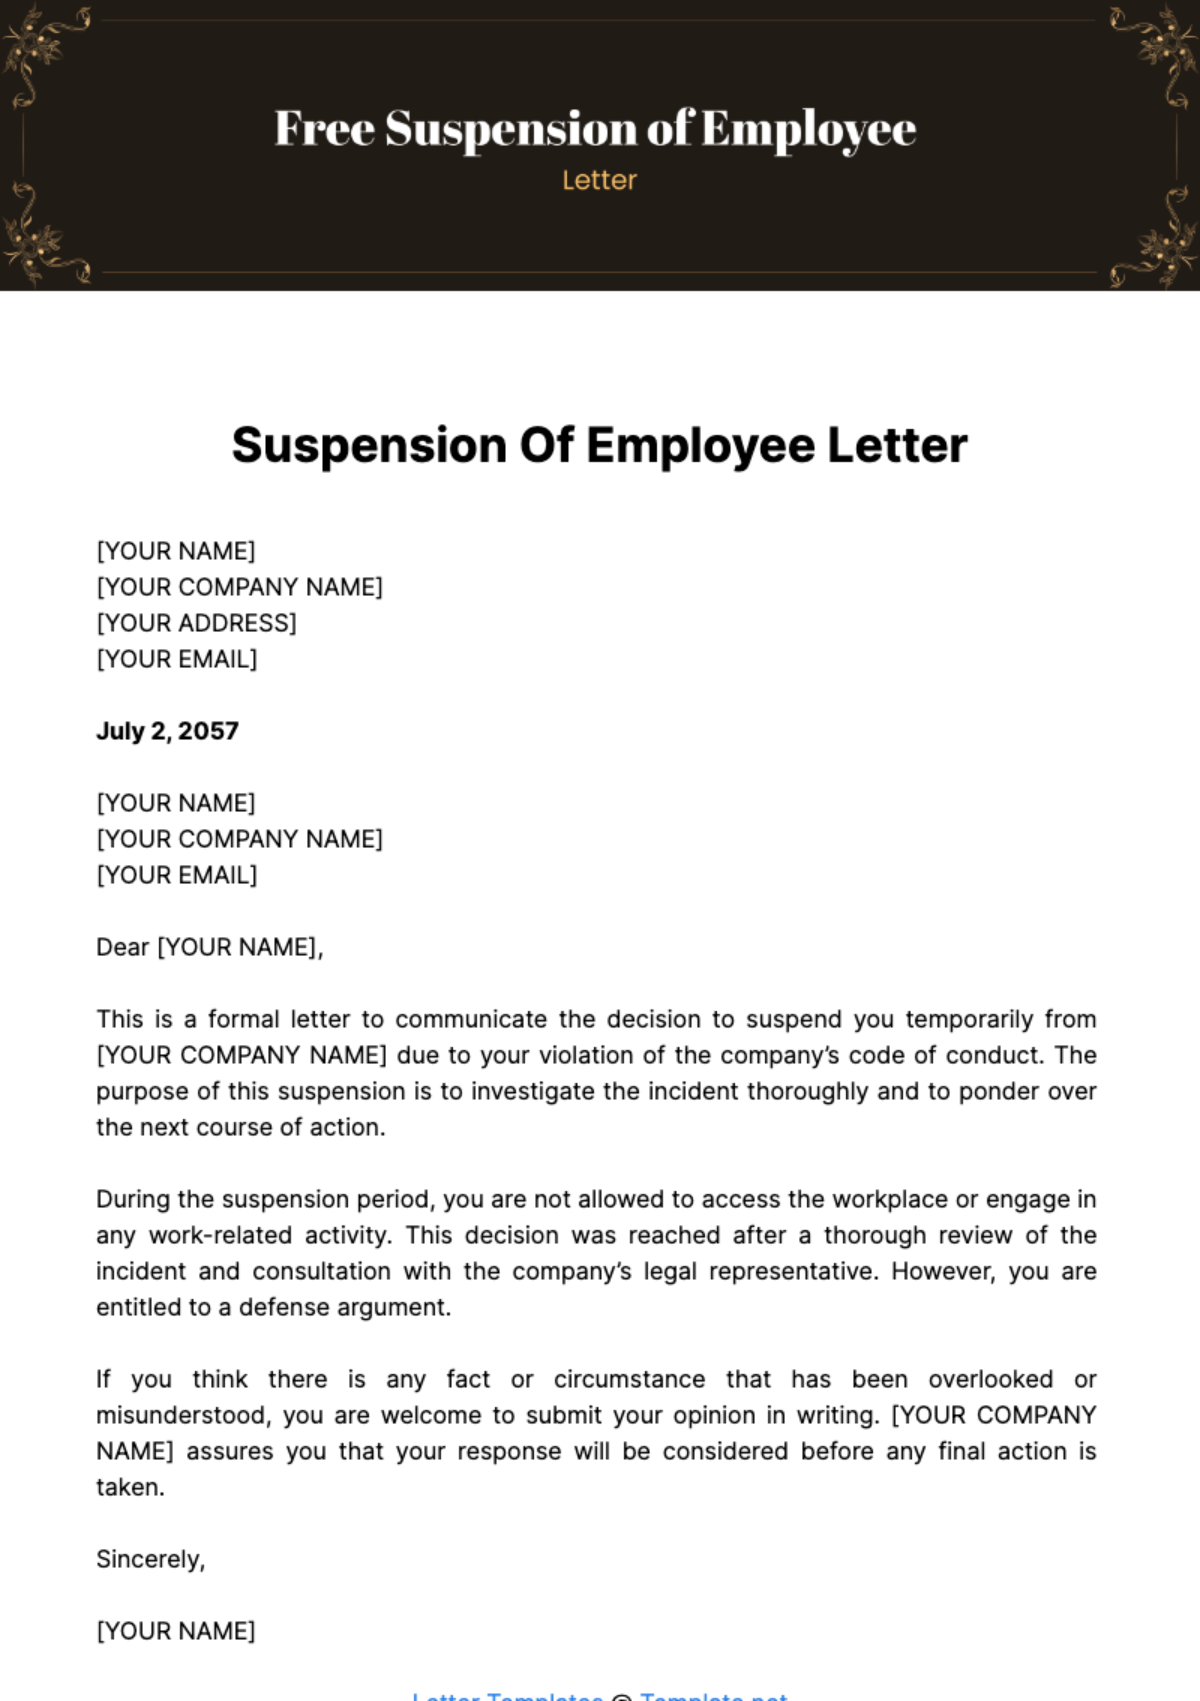 Free Suspension of Employee Letter Template